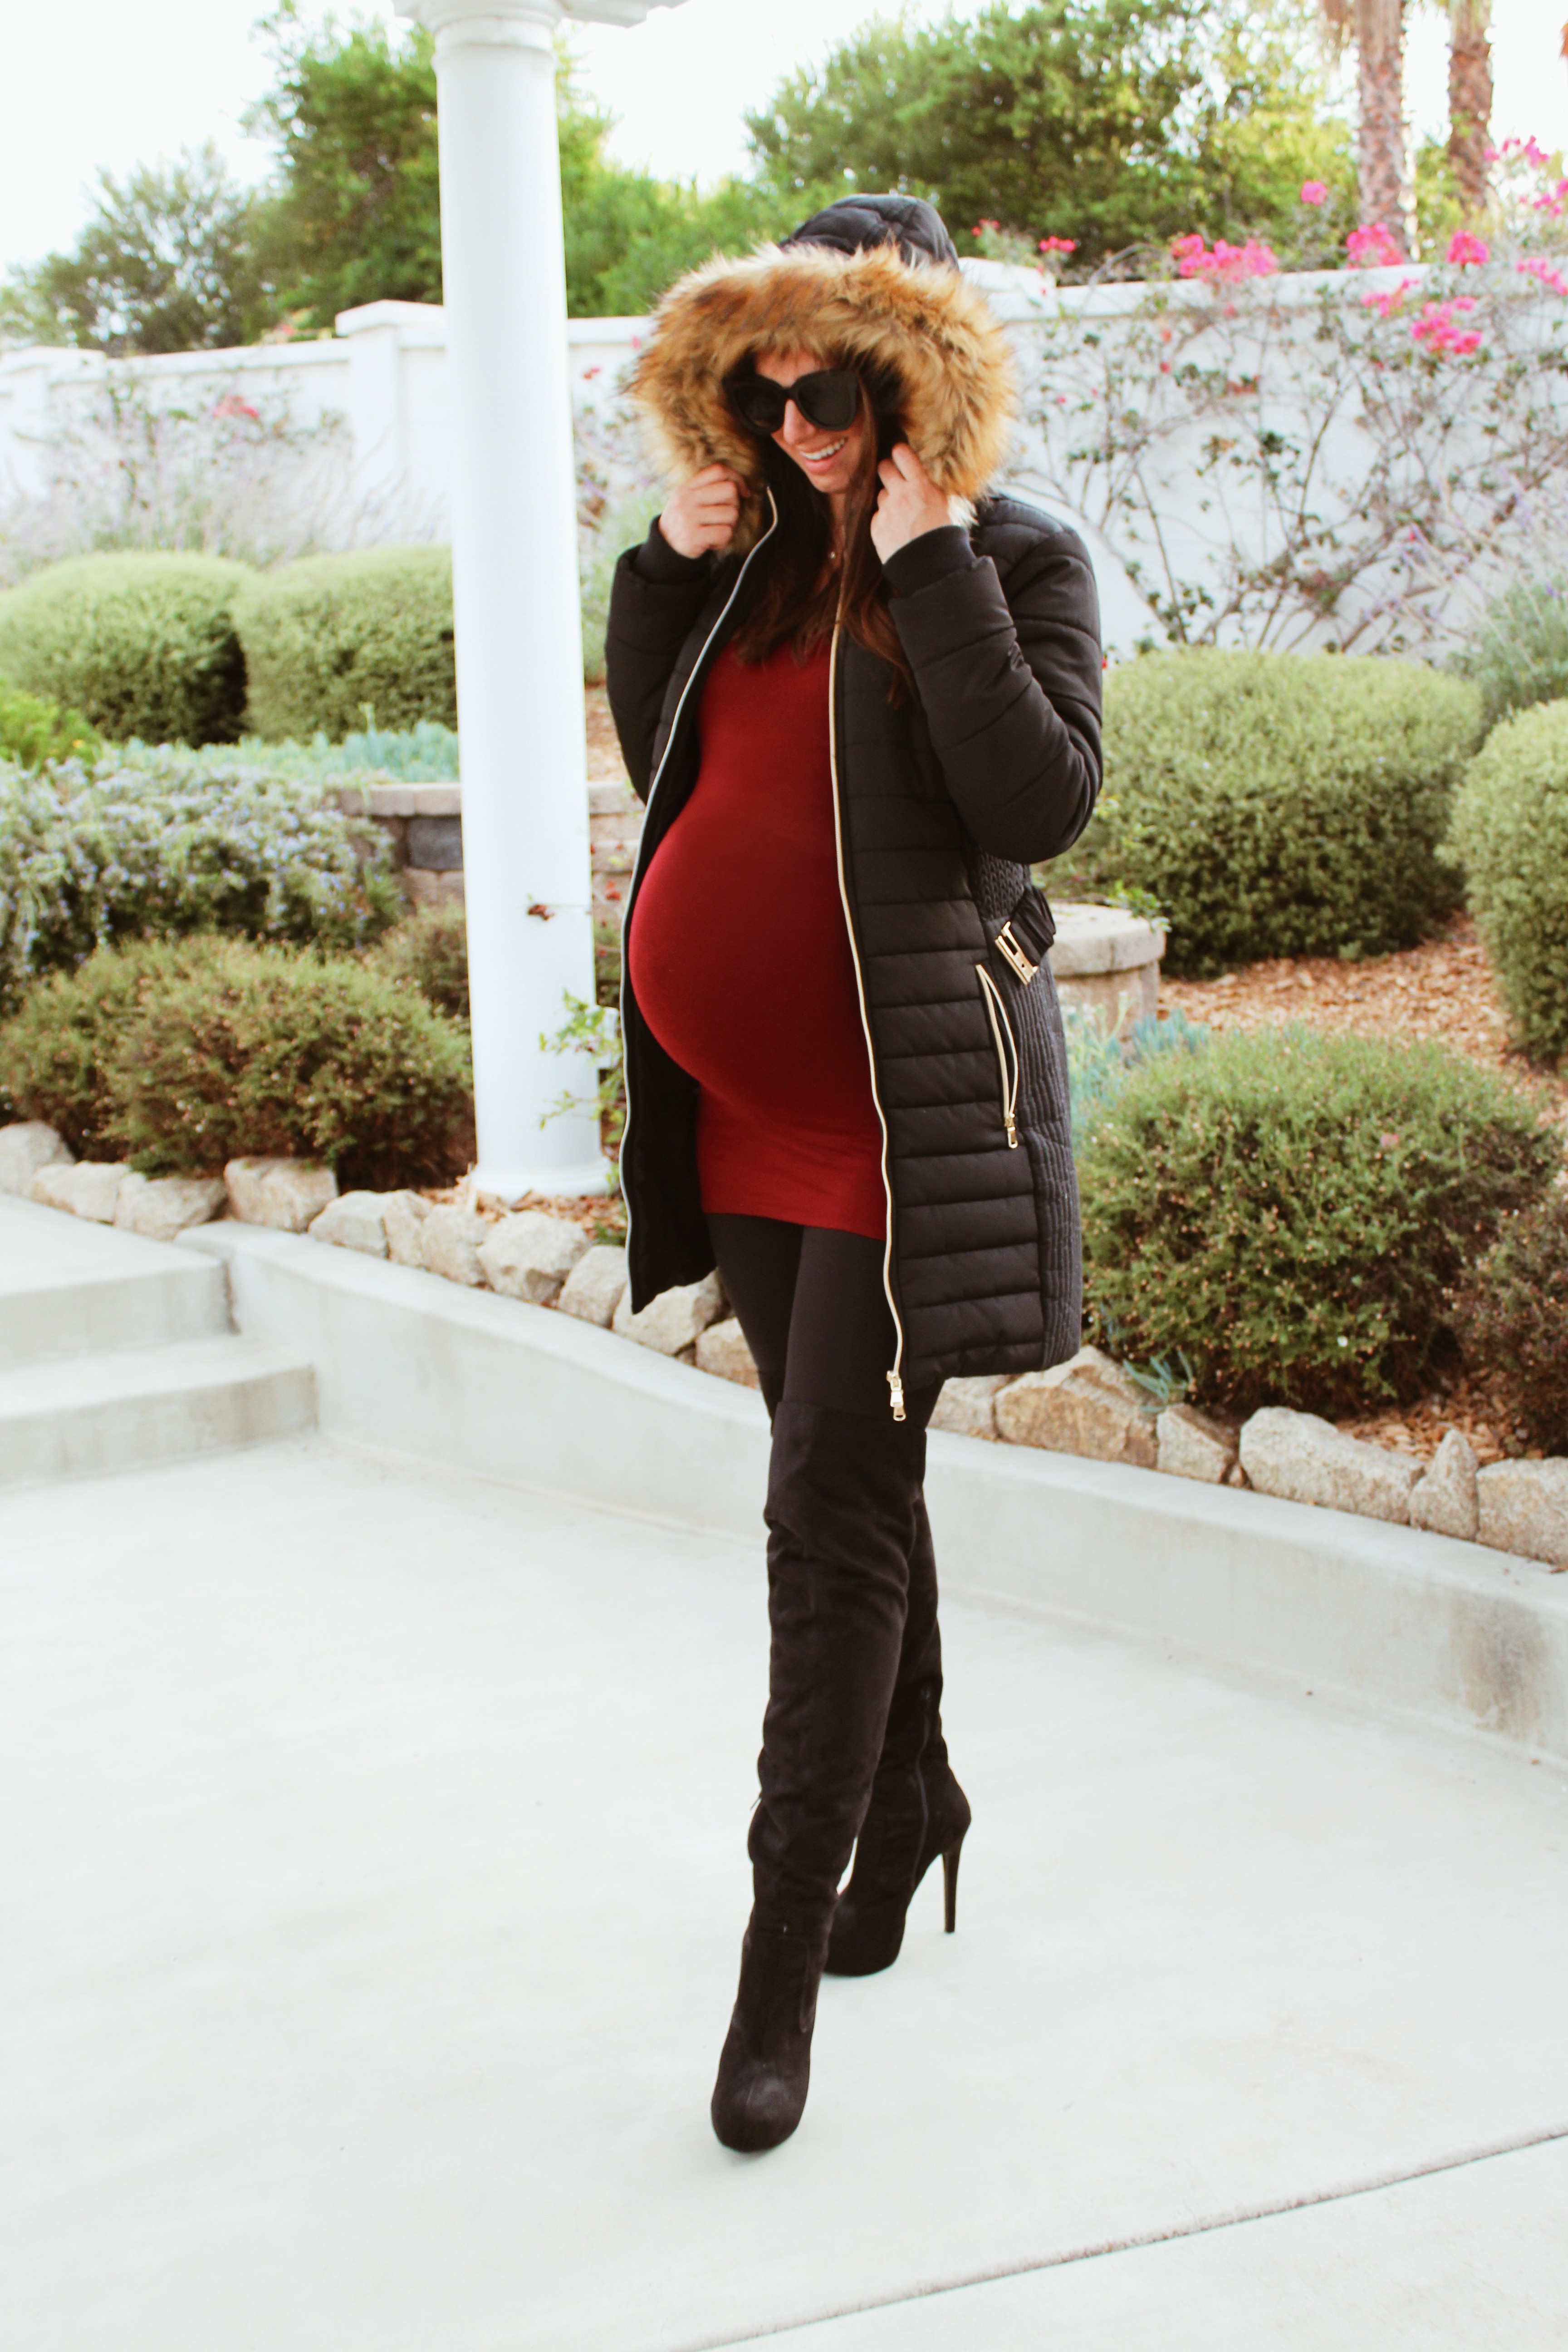 Winter Maternity Outfits - Cold Weather Staples For a Growing Bump